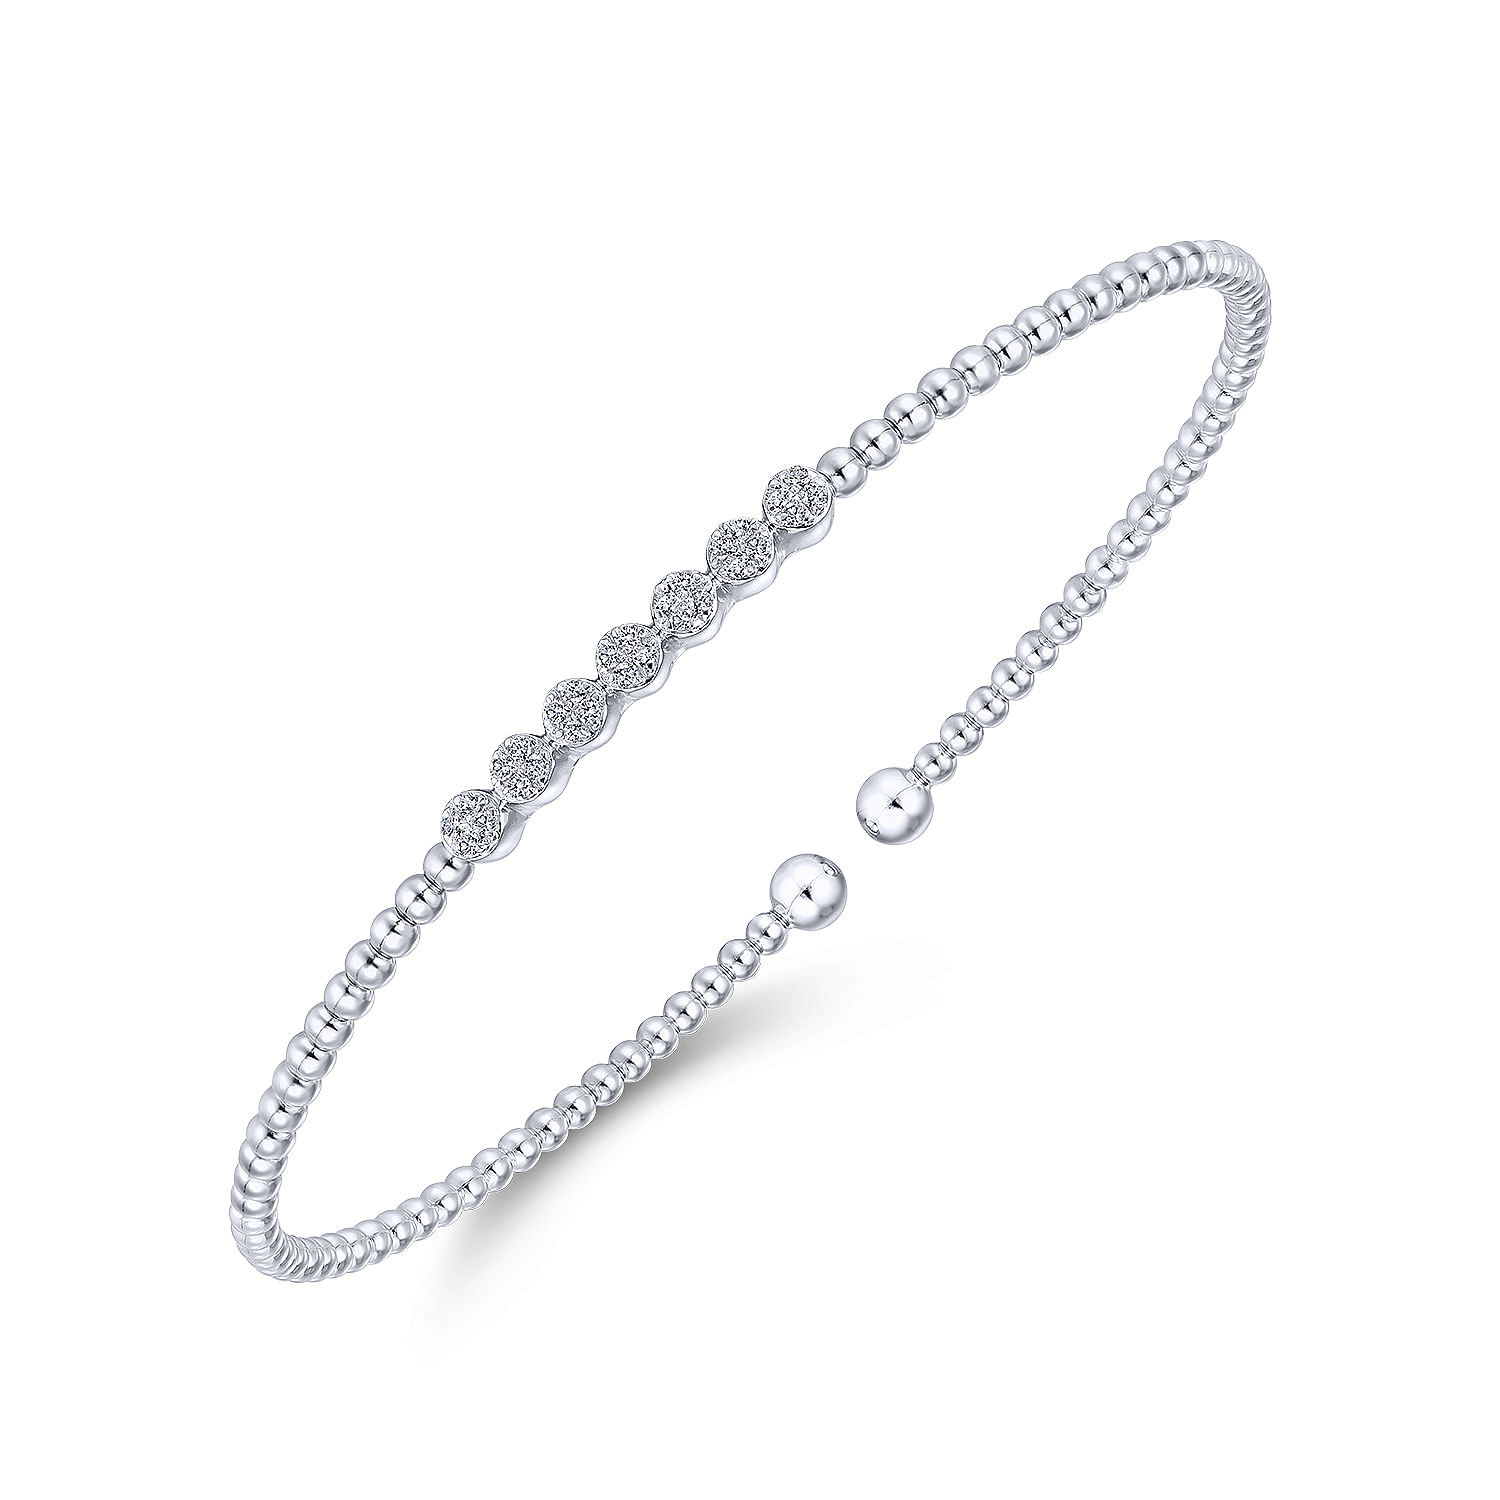 14K White Gold Bujukan Bead Cuff Bracelet with Cluster Diamond Stations